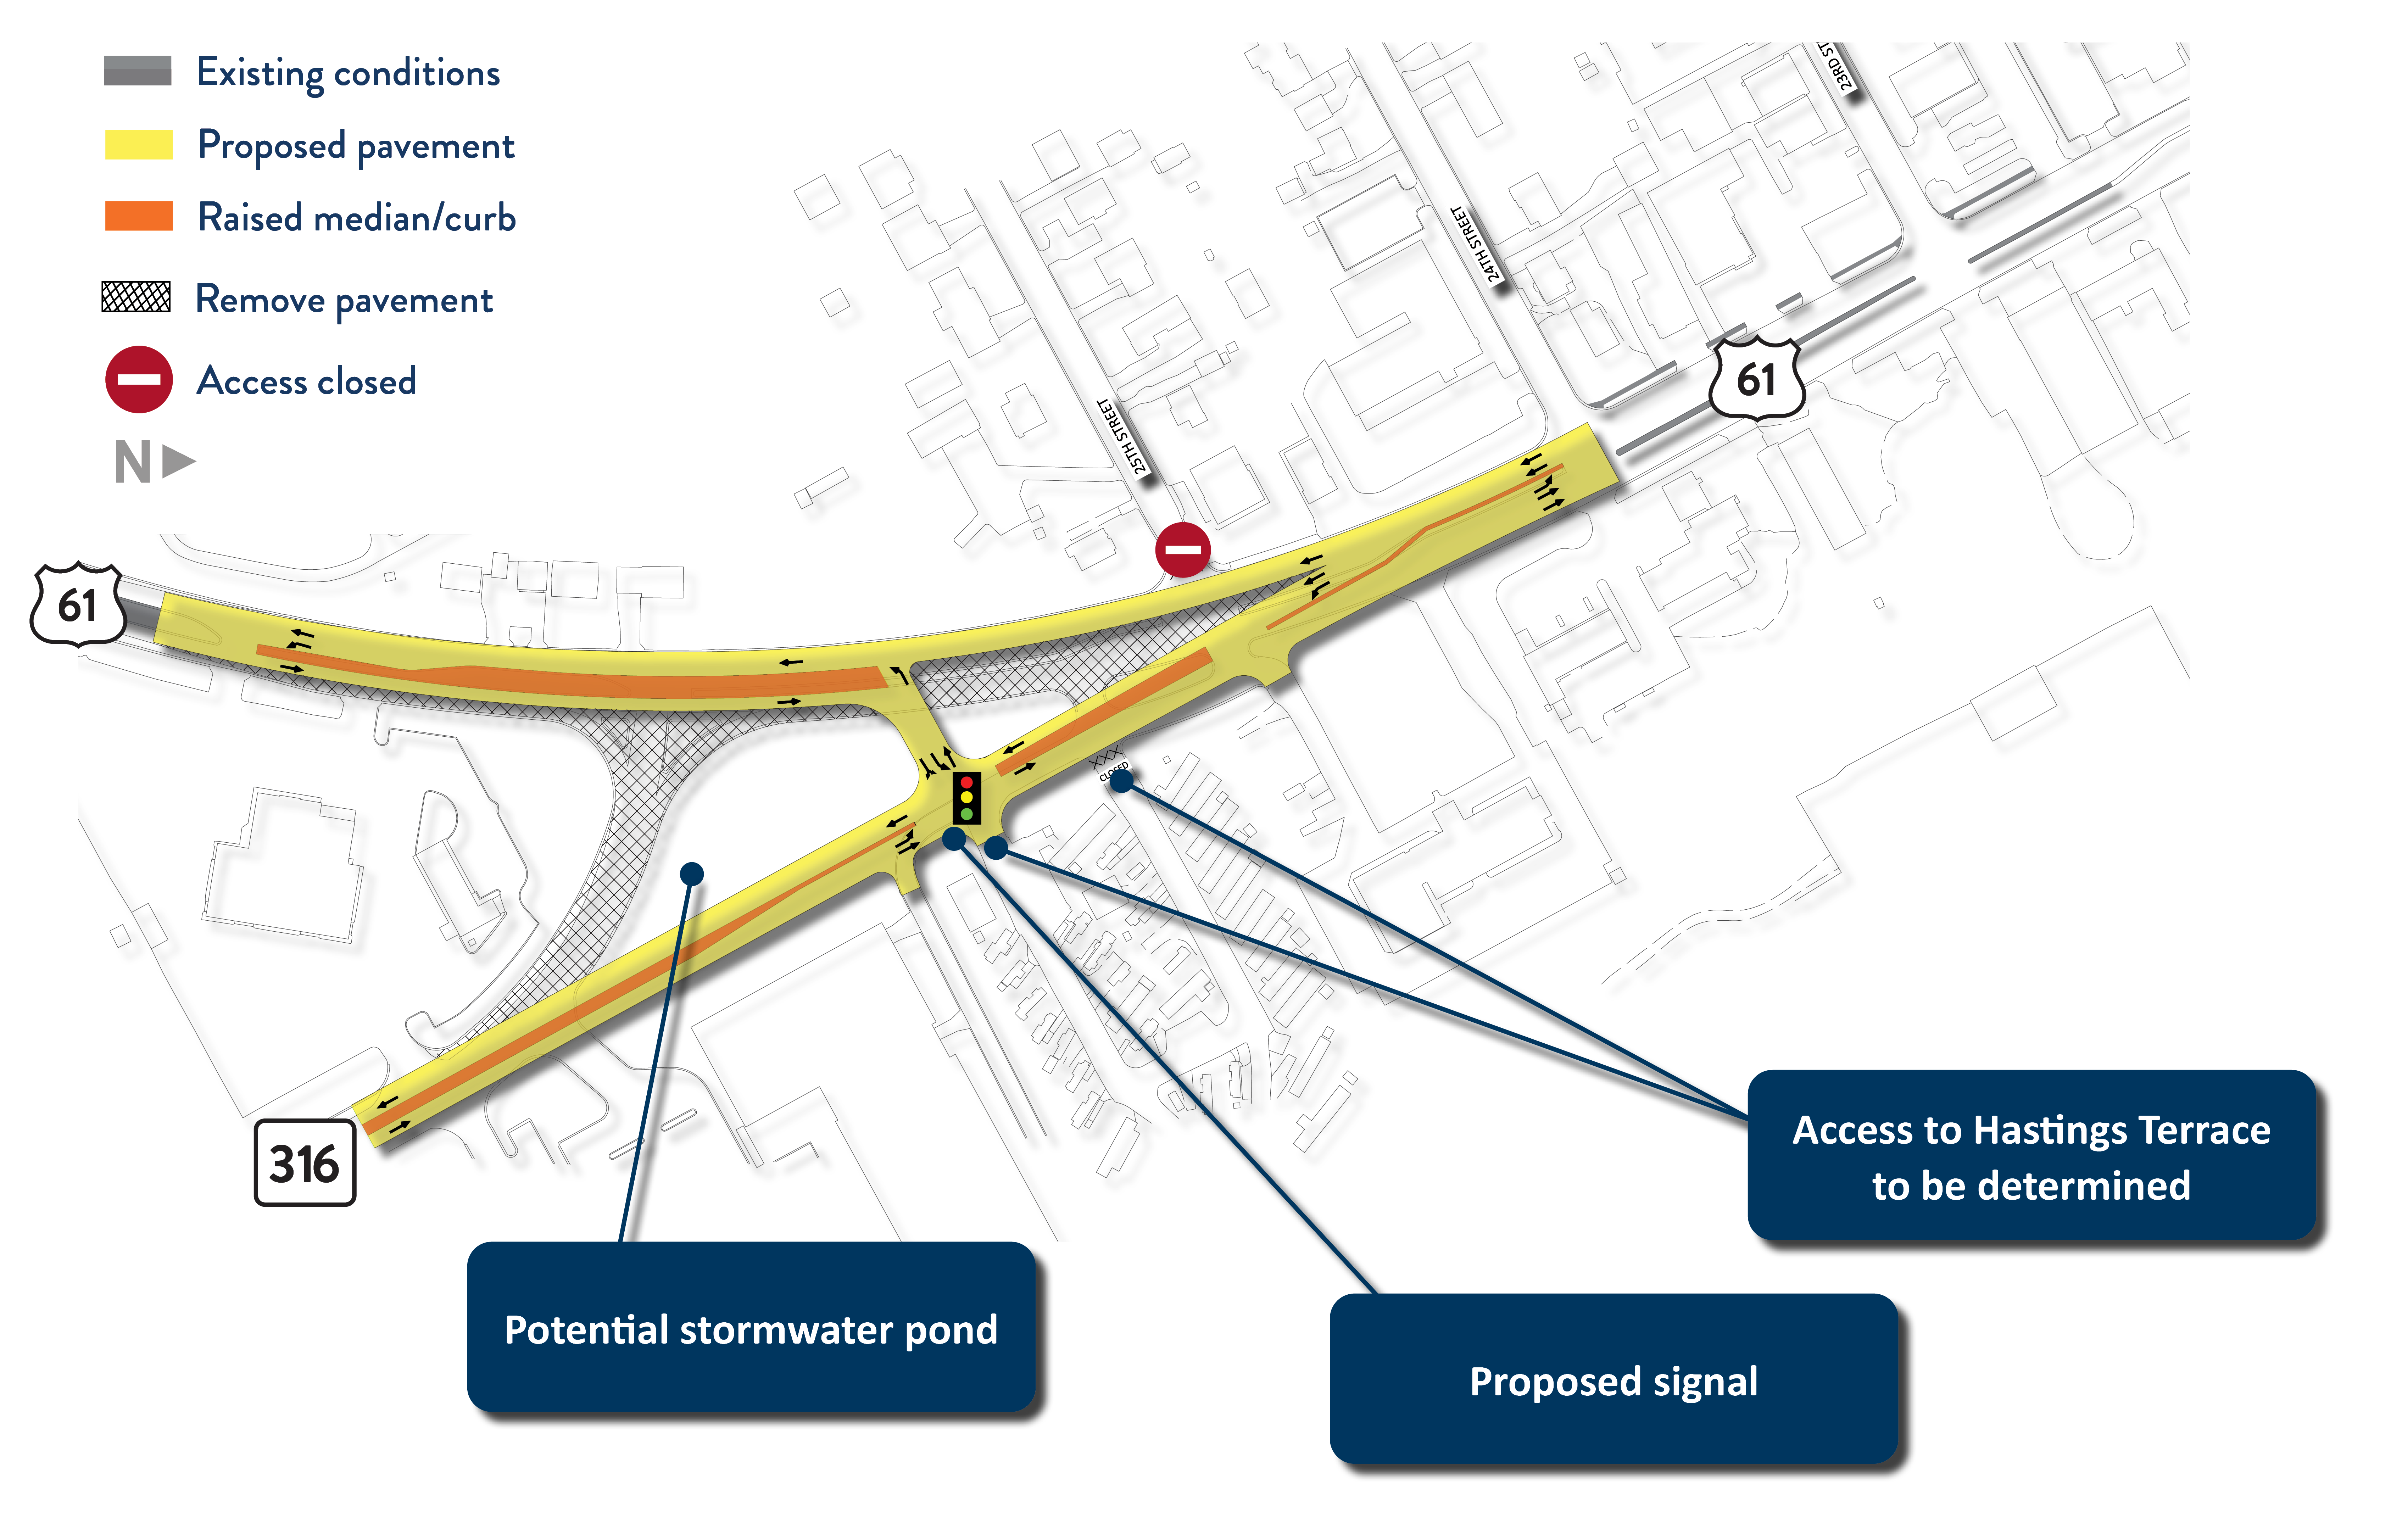 Concept drawing shows a direct connection from Hwy 316 to Hwy 61 along a new roadway along with a new signal near Hastings Terrace.  